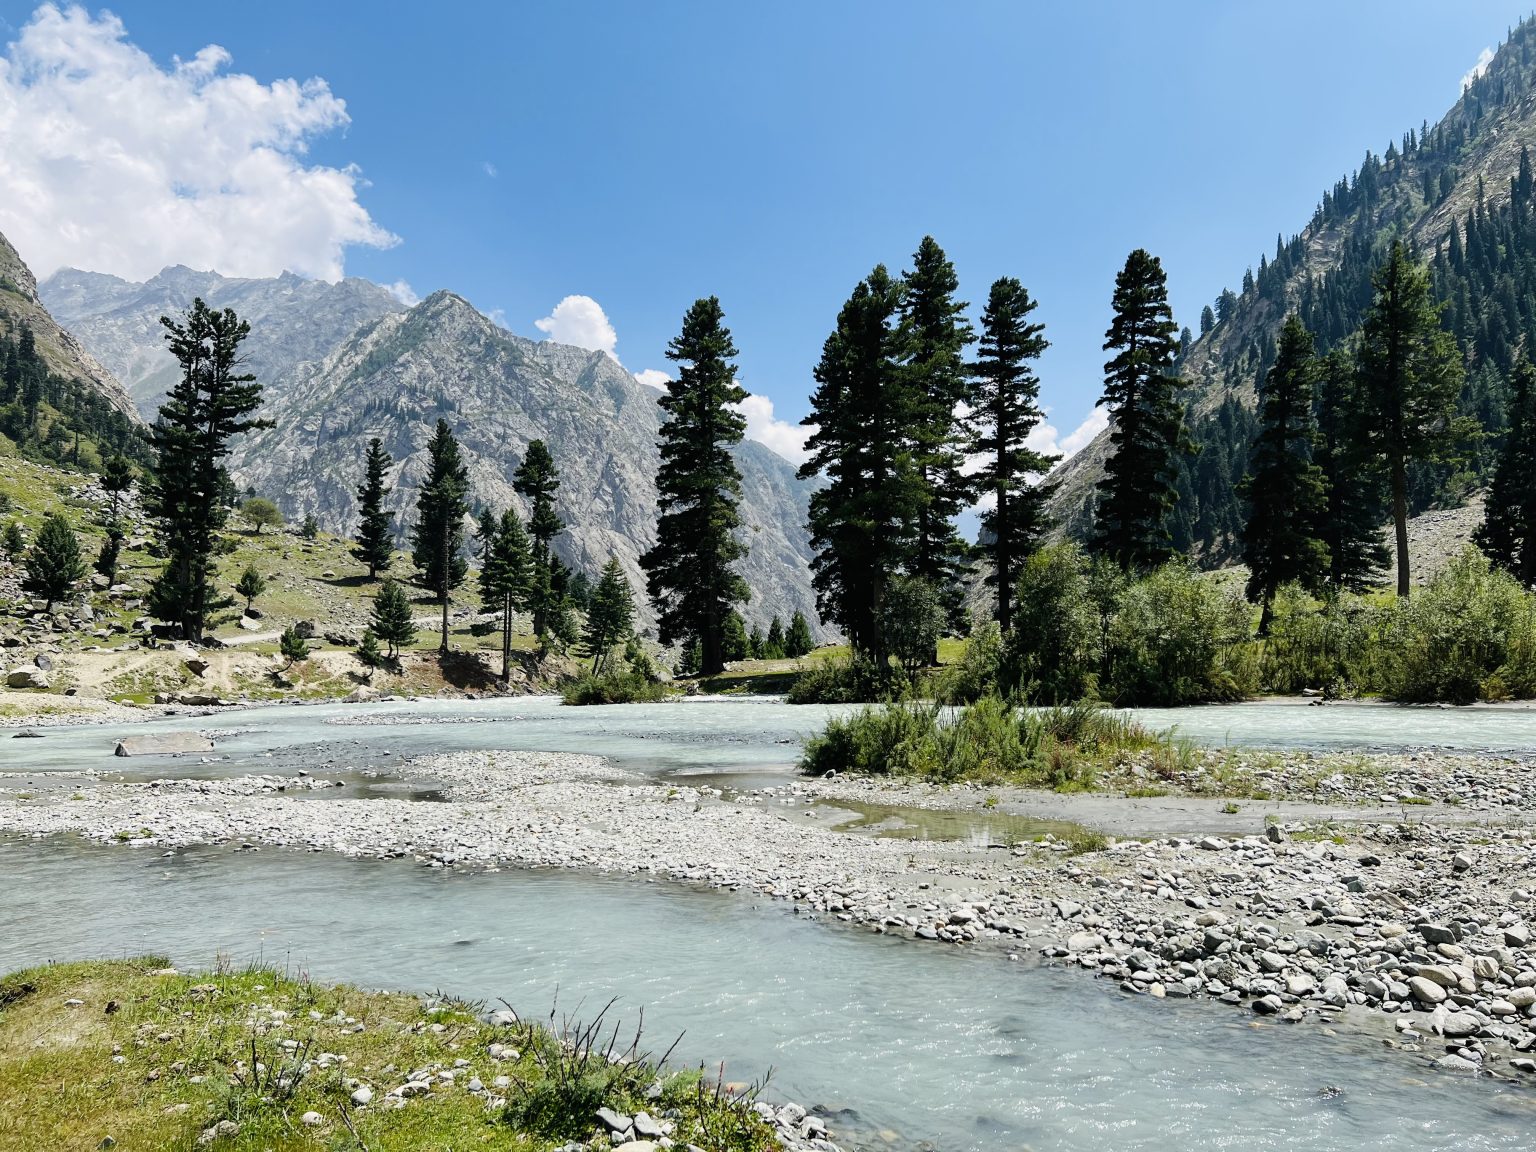 Nature view from a location near Mahodand Lake, Kalam, Pakistan. Photo contributed by Muhammad Shakeel to the WordPress Photo Directory.